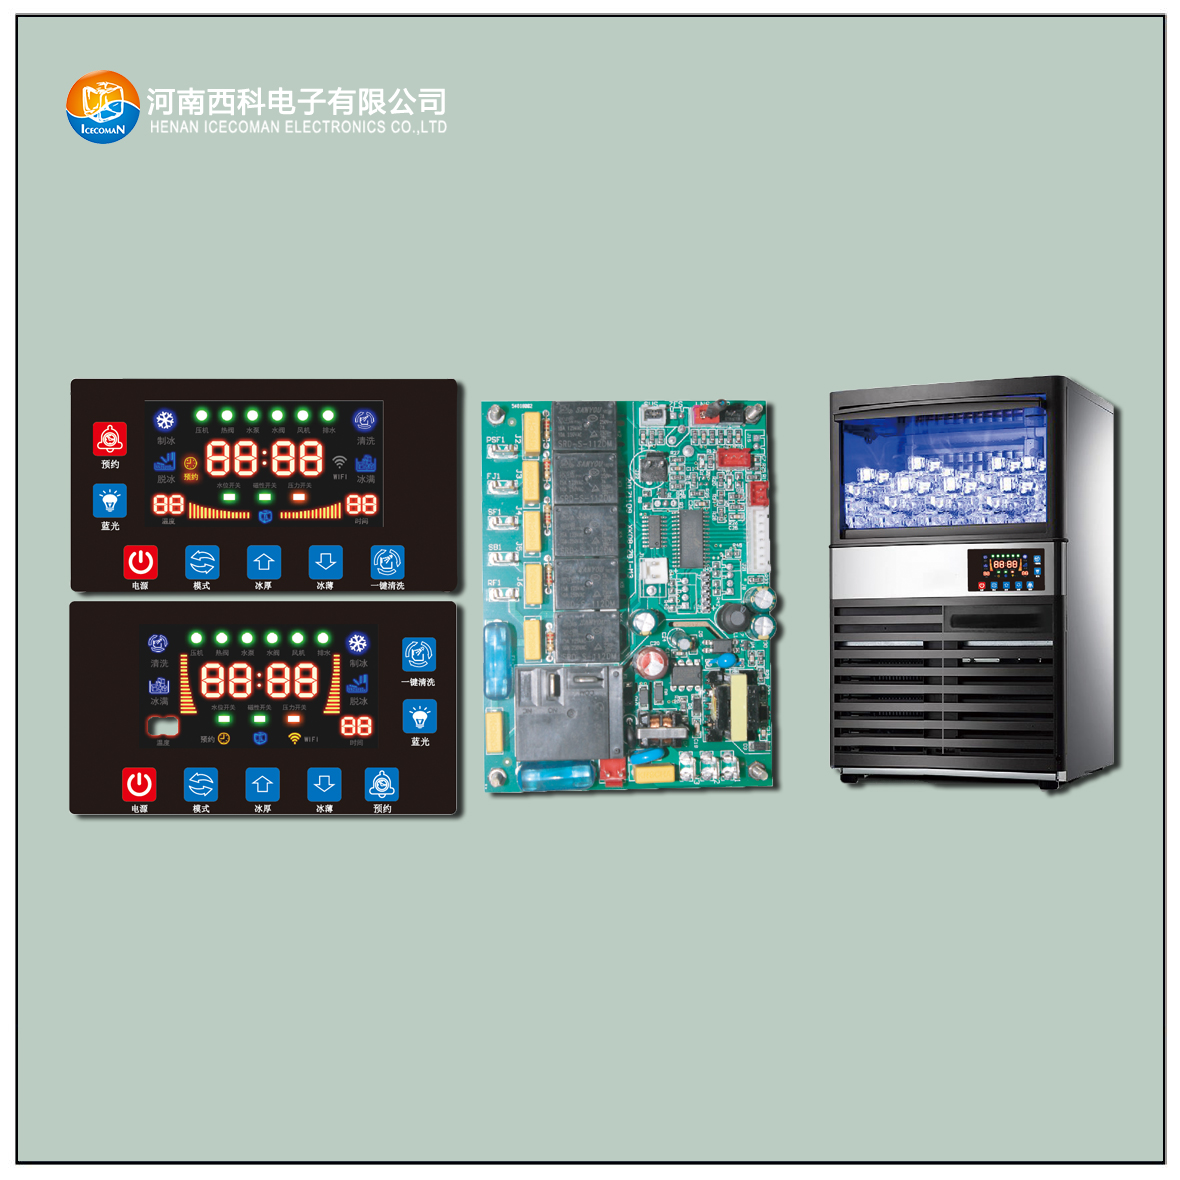 ZBJ-SMP-A/B ice maker controller